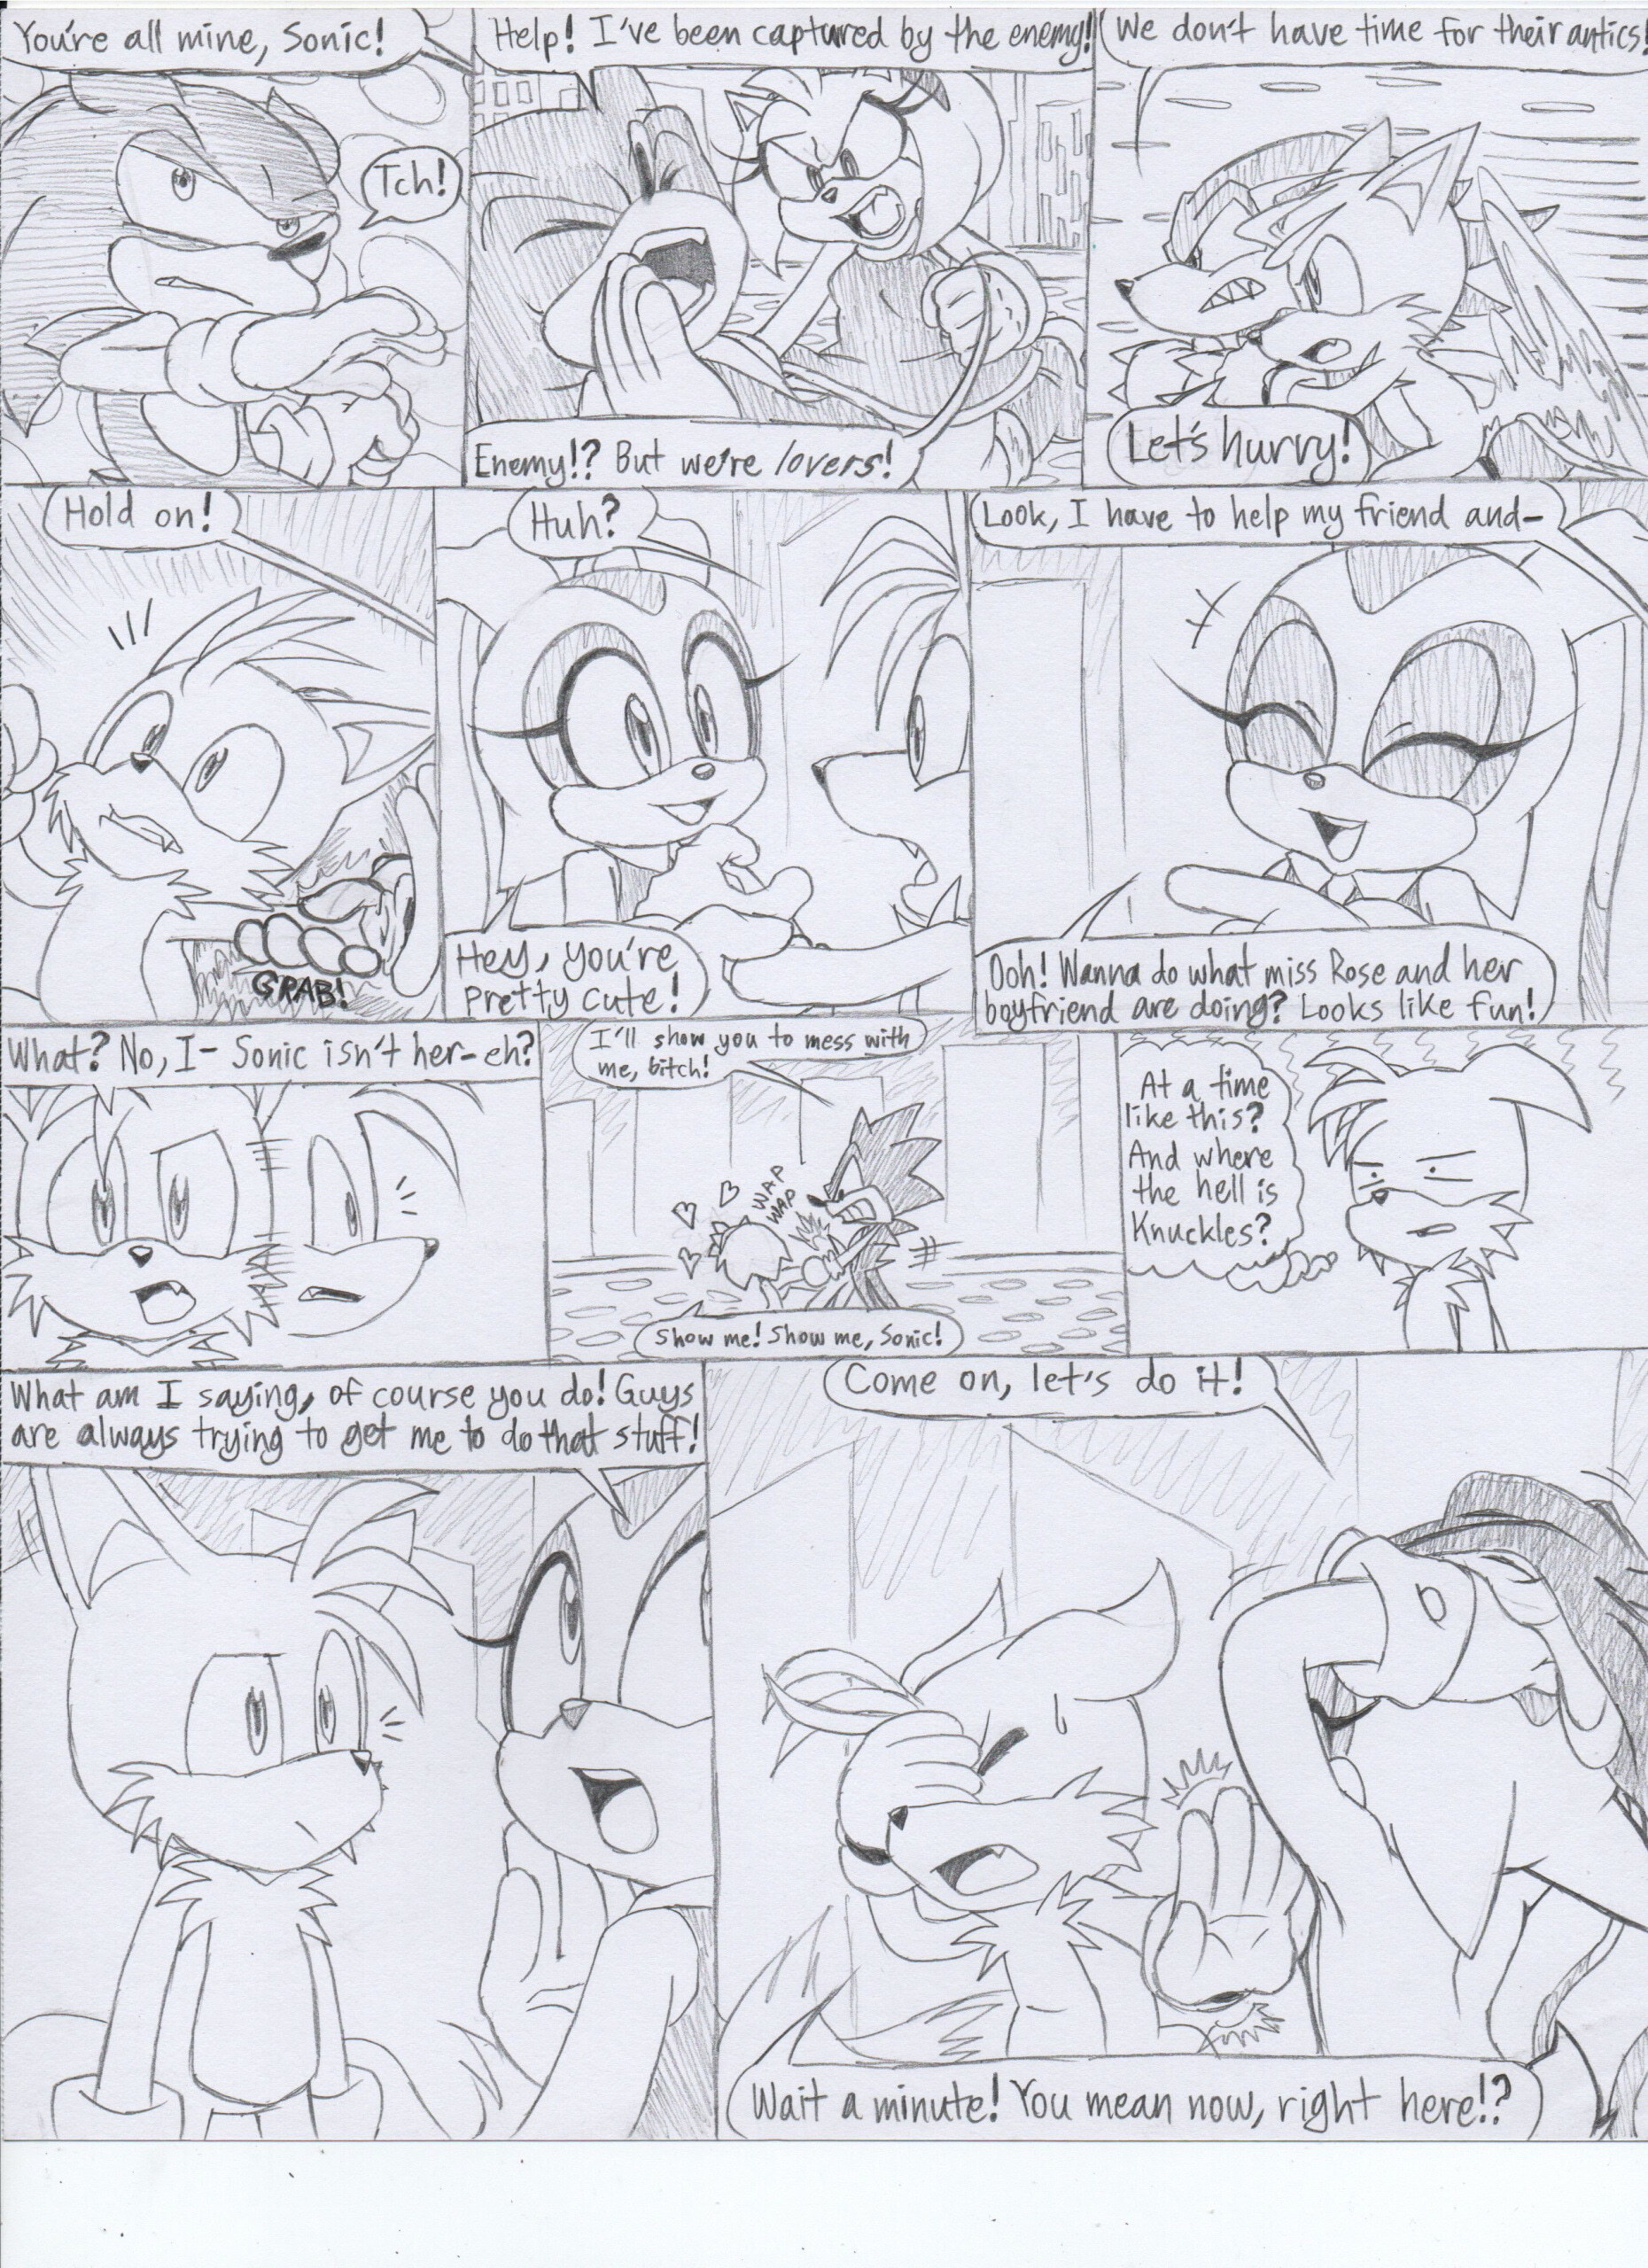 Cream x Tails - Page 1